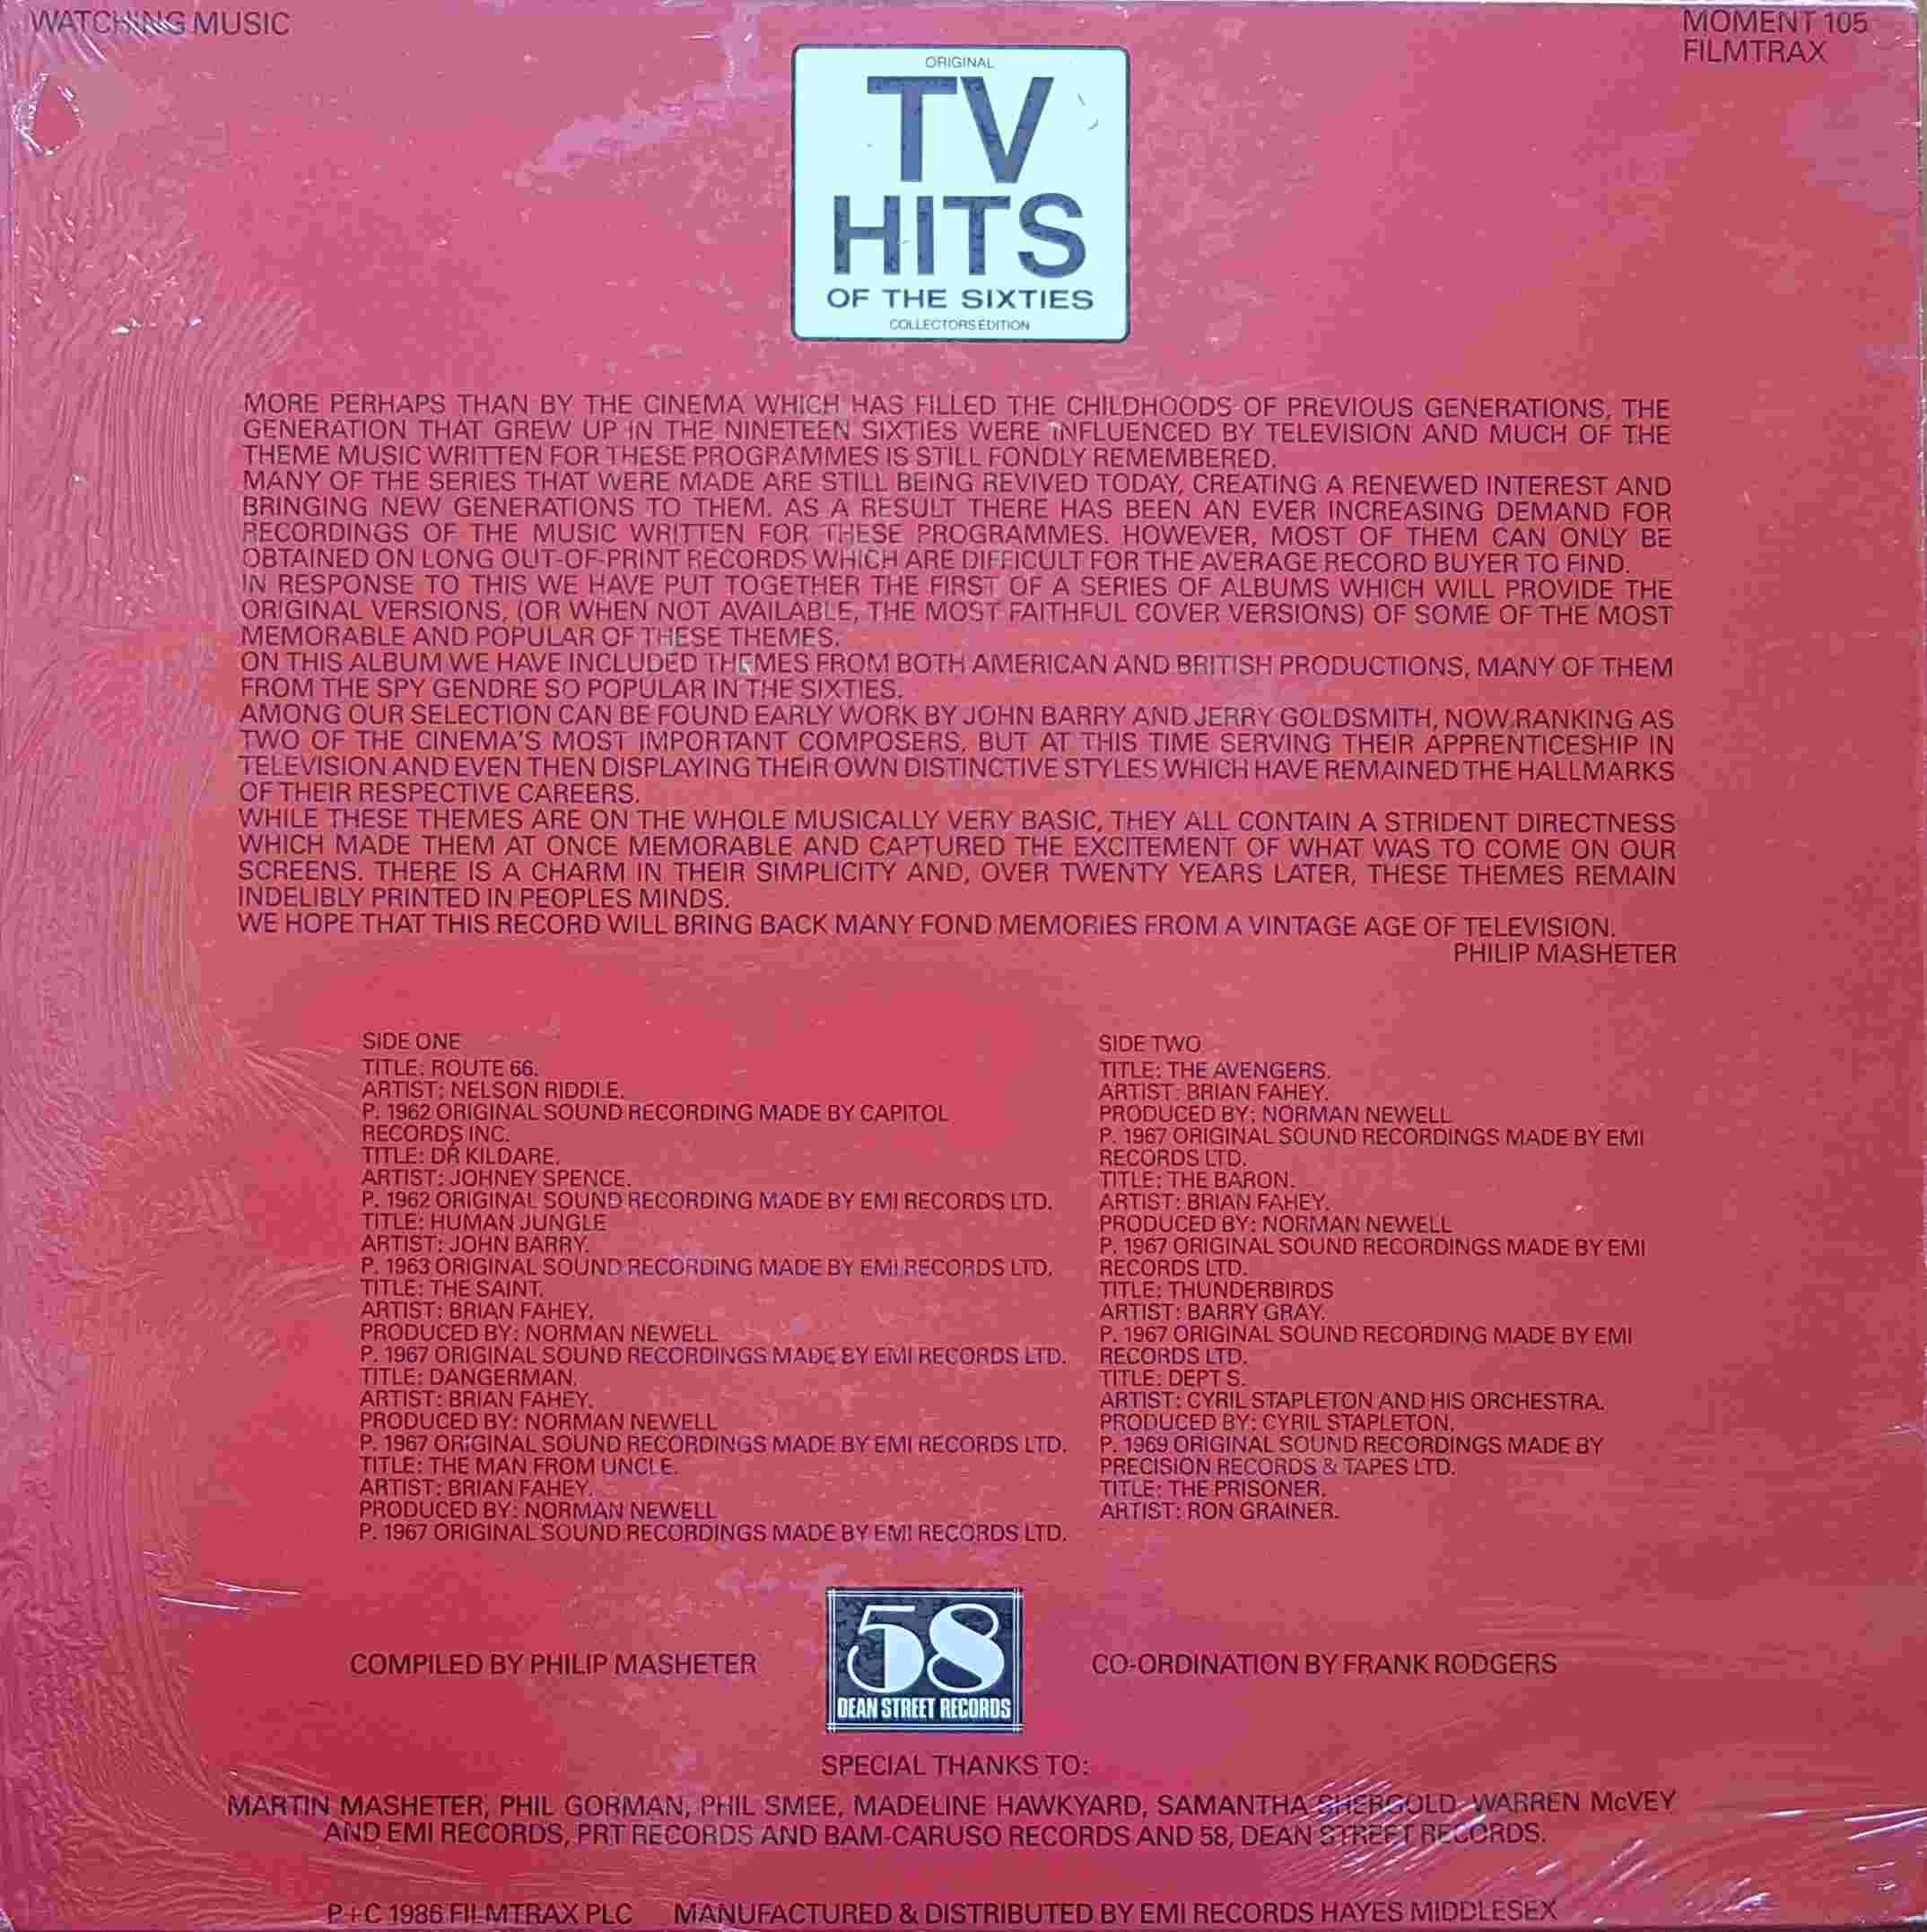 Picture of MOMENT 105 R Original TV hits of the sixties by artist Various from ITV, Channel 4 and Channel 5 library